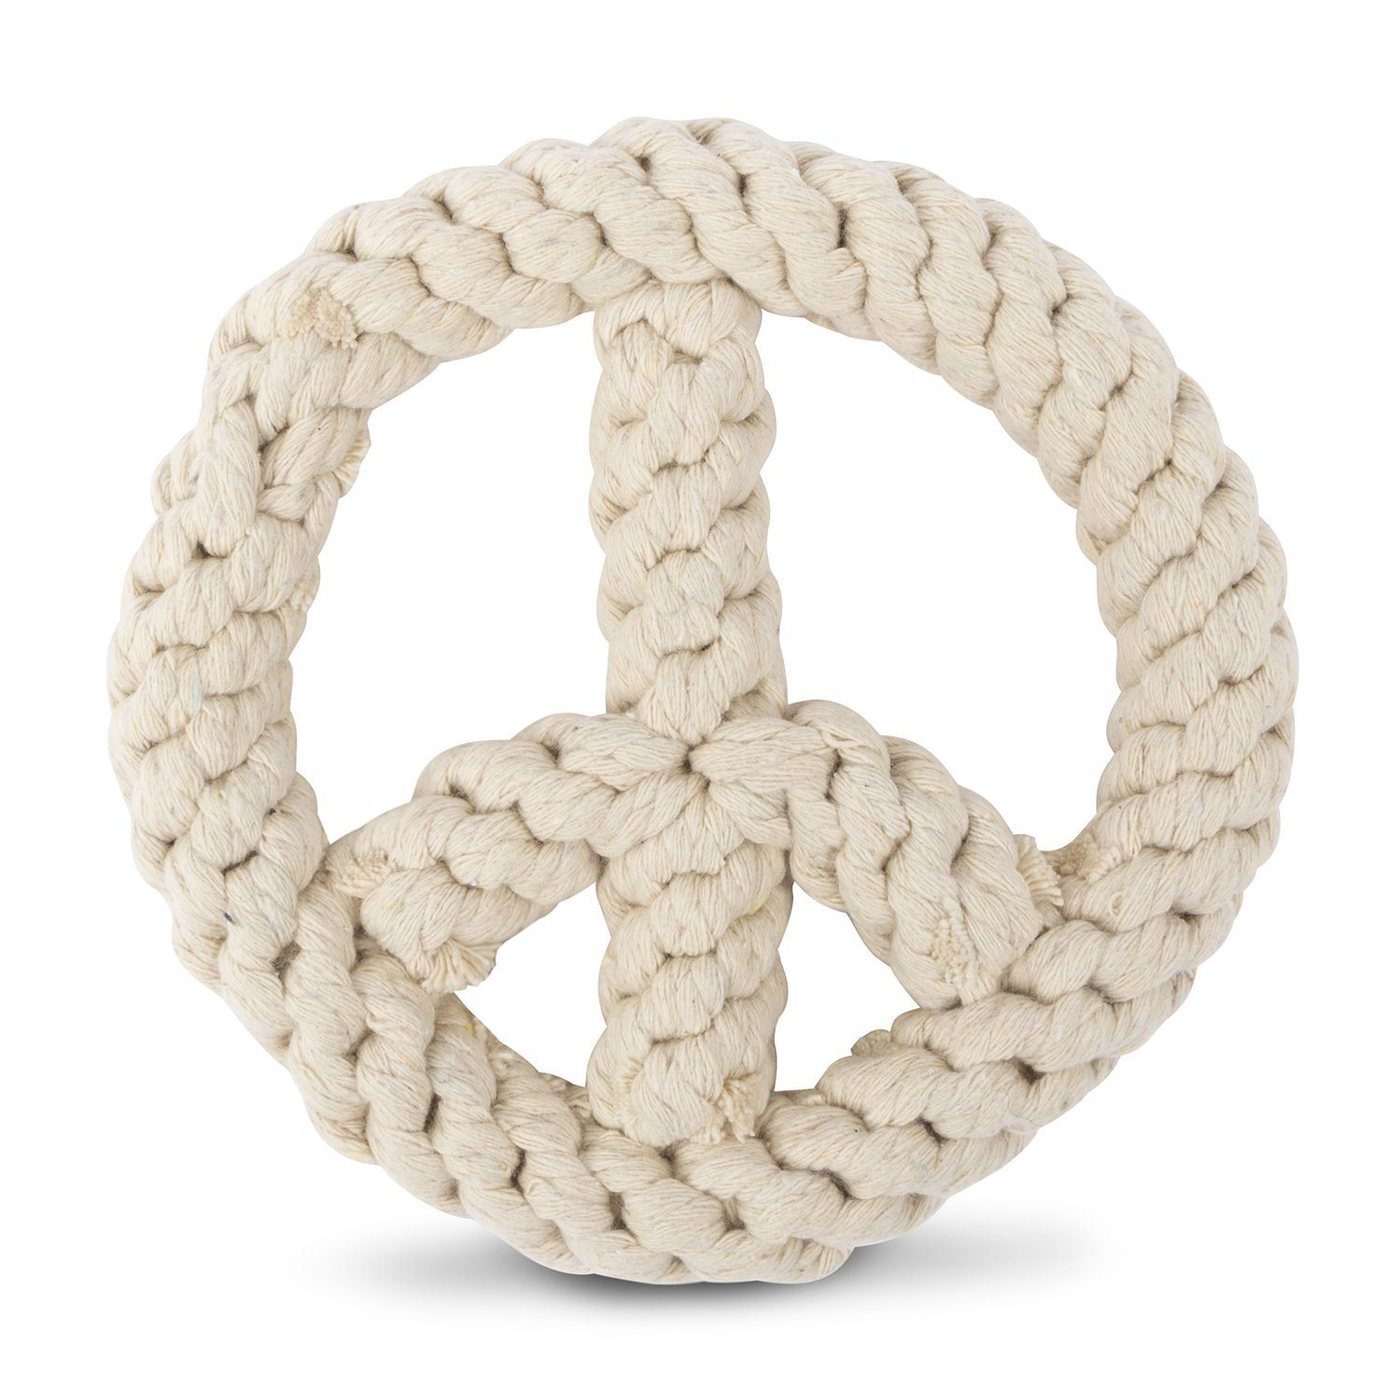 Peace on Earth Dog Toy